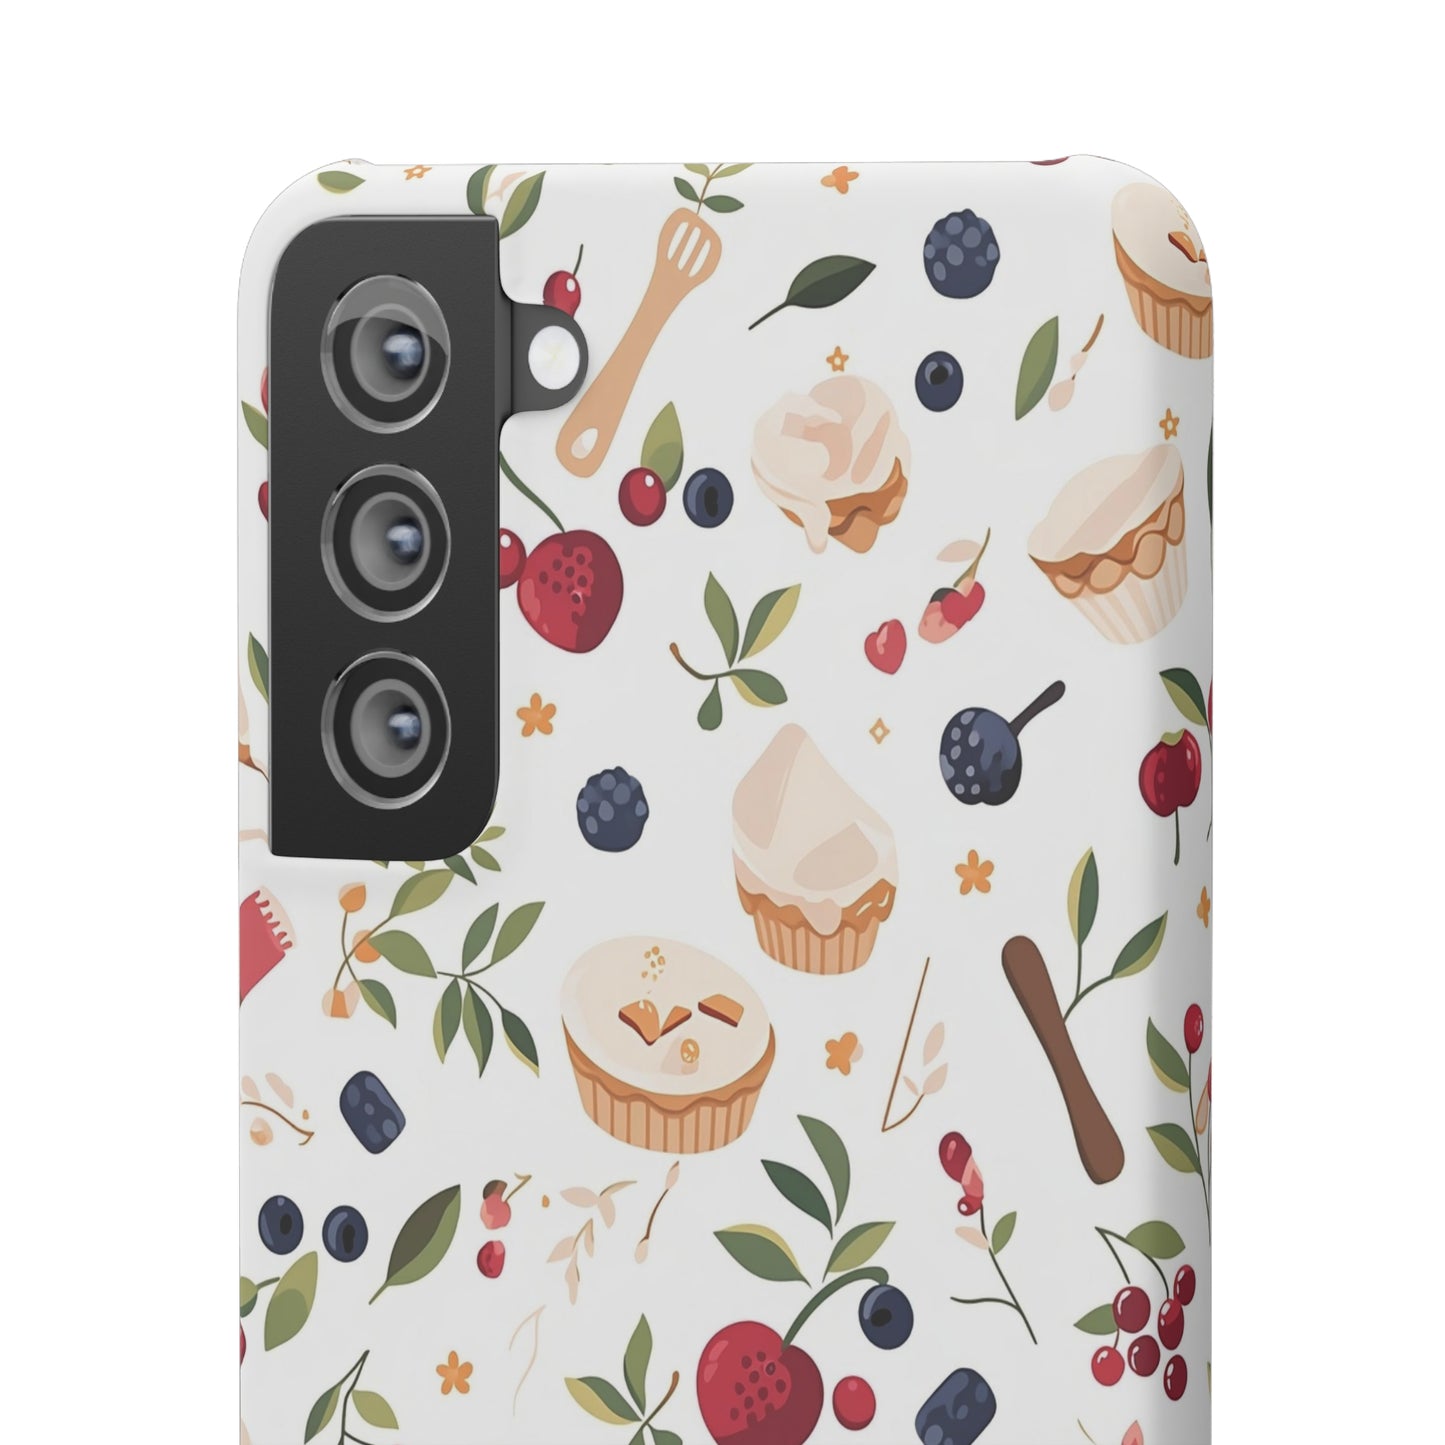 "Chery Delight" Samsung Snap Cases